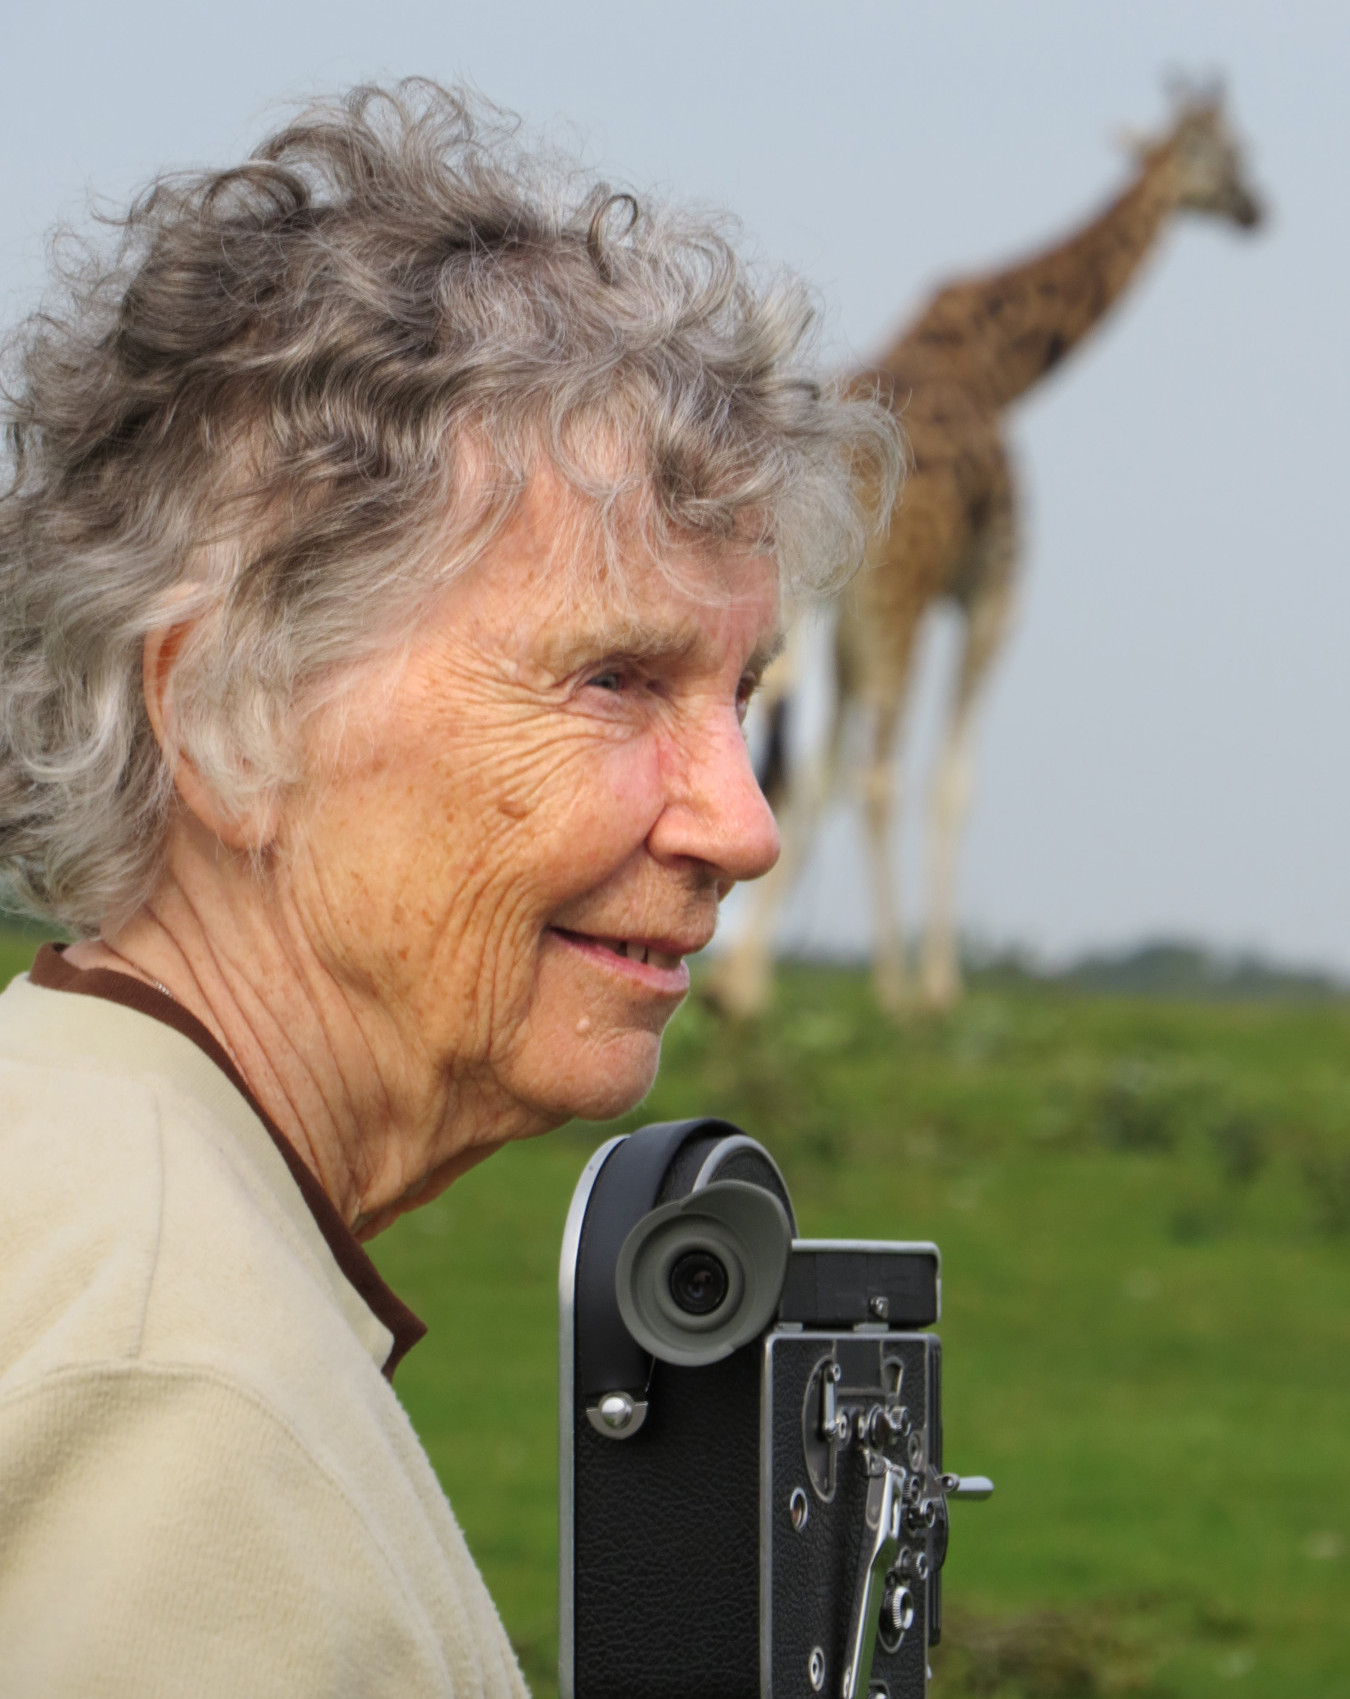 Dr. Dagg with a camera and giraffe